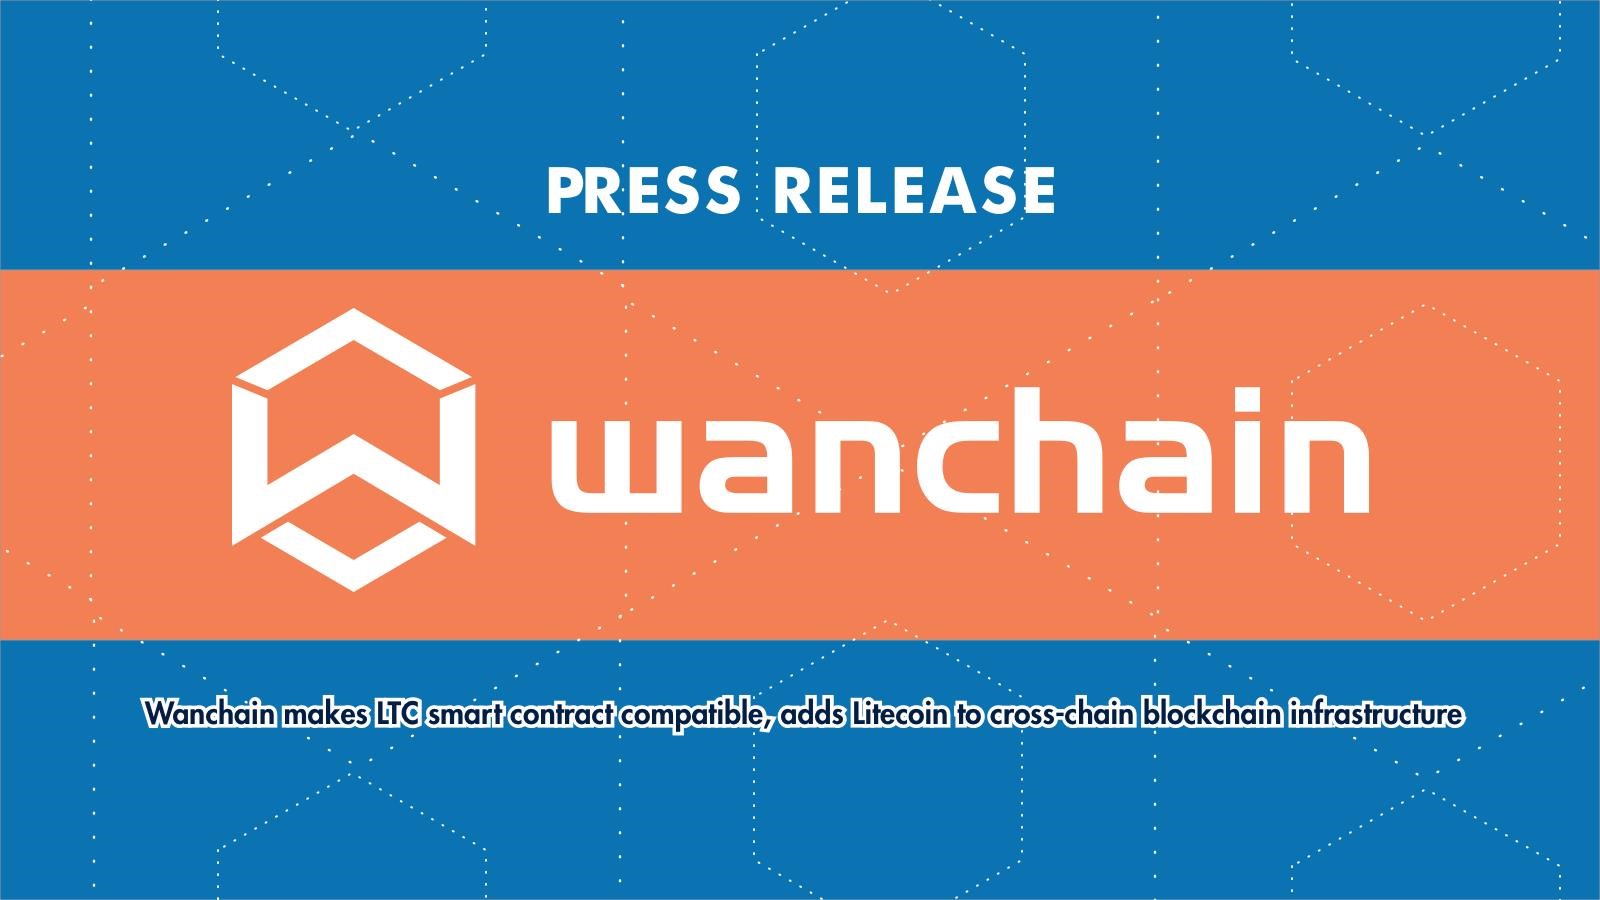 Wanchain, Tuesday, June 22, 2021, Press release picture